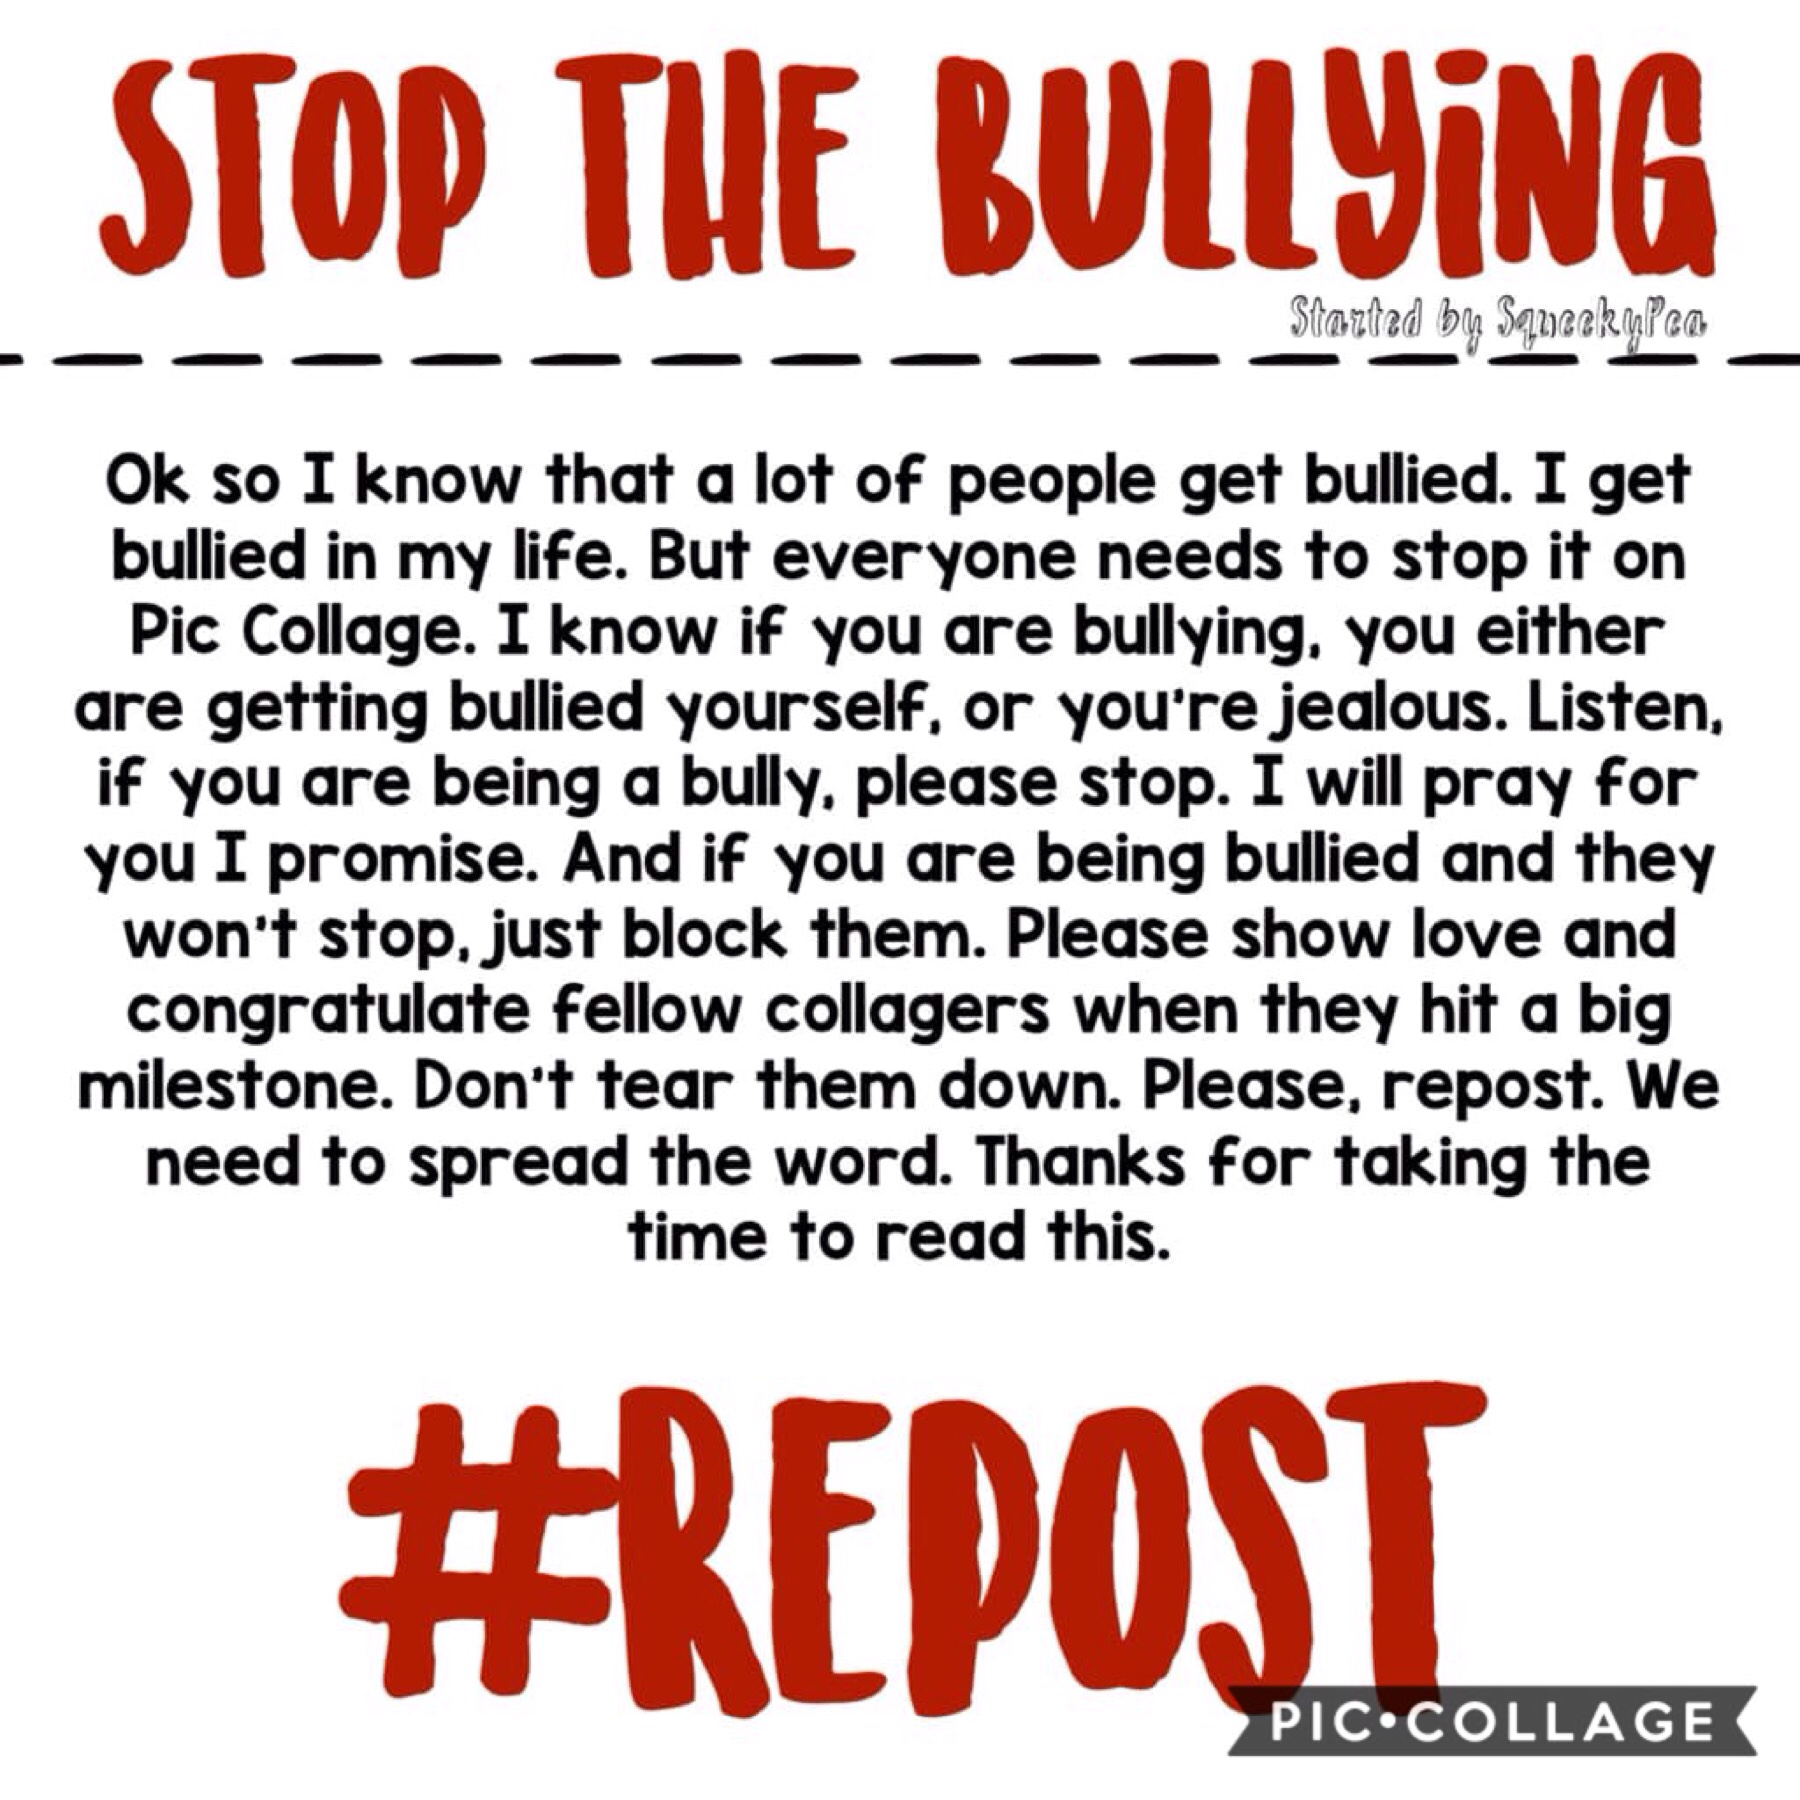 -good on you squeekypea!-
Go check her account she's an awesome collager too! But plzz repost this this is really important and we need to stop this! Comment ❤️ if you reposted it!